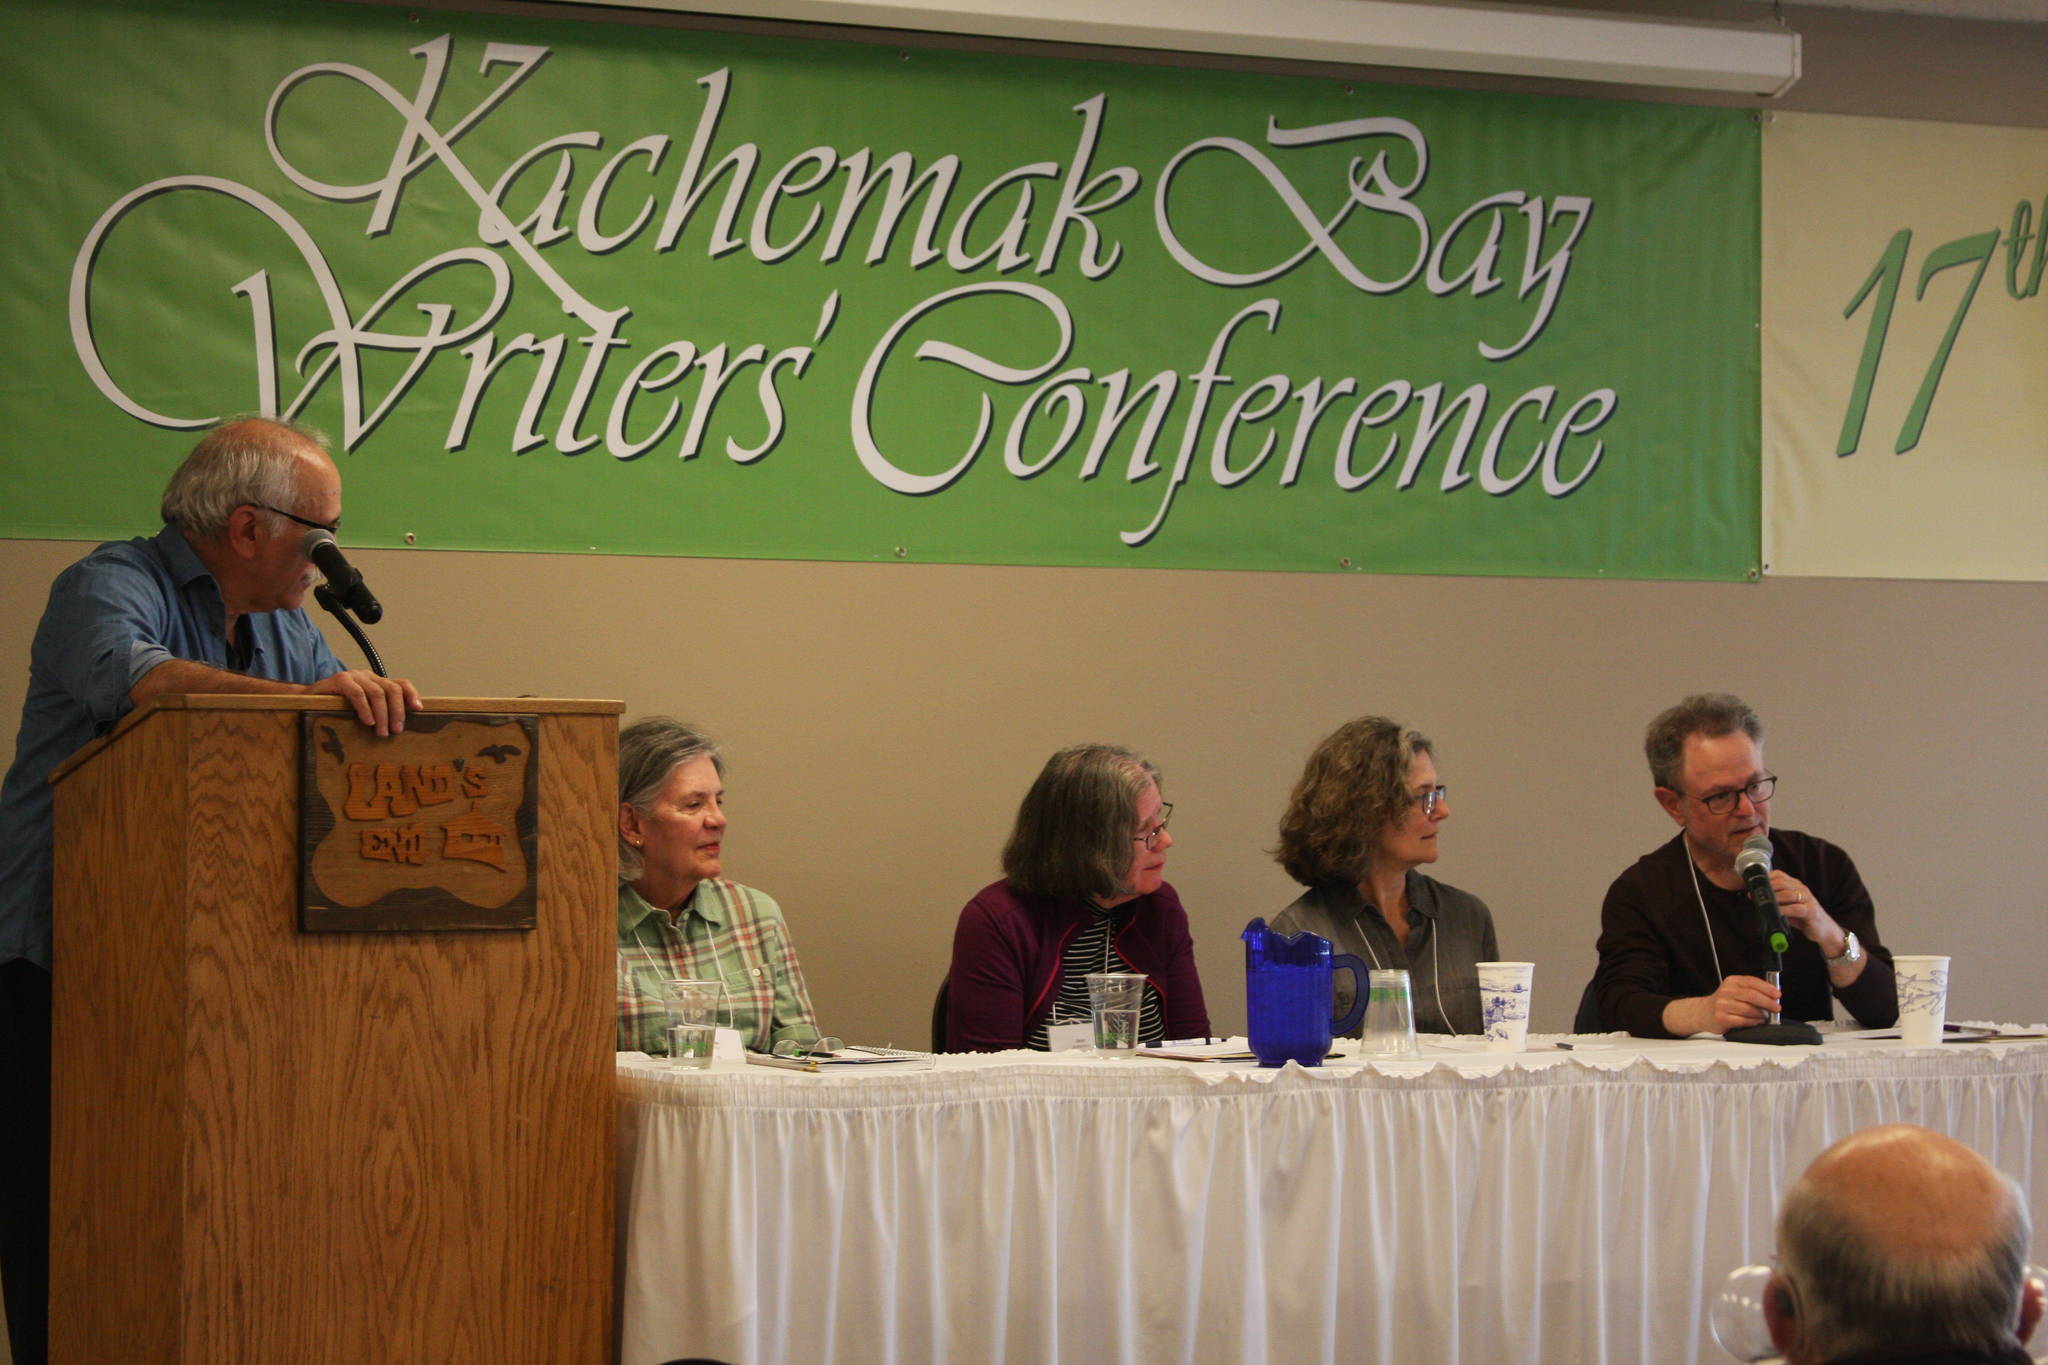 From left to right: Authors and conference presenters Richard Chiappone, Diane Glancy, Jean Anderson, Jean Hegland, and Floyd Skloot discuss how individuals create their own literary canon of admired authors during their panel, “Canon of One’s Own”, on Sunday, June 10, 2018 at the Kachemak Bay Writers’ Conference at Land’s End Resort in Homer, Alaska. (Photo by Delcenia Cosman)